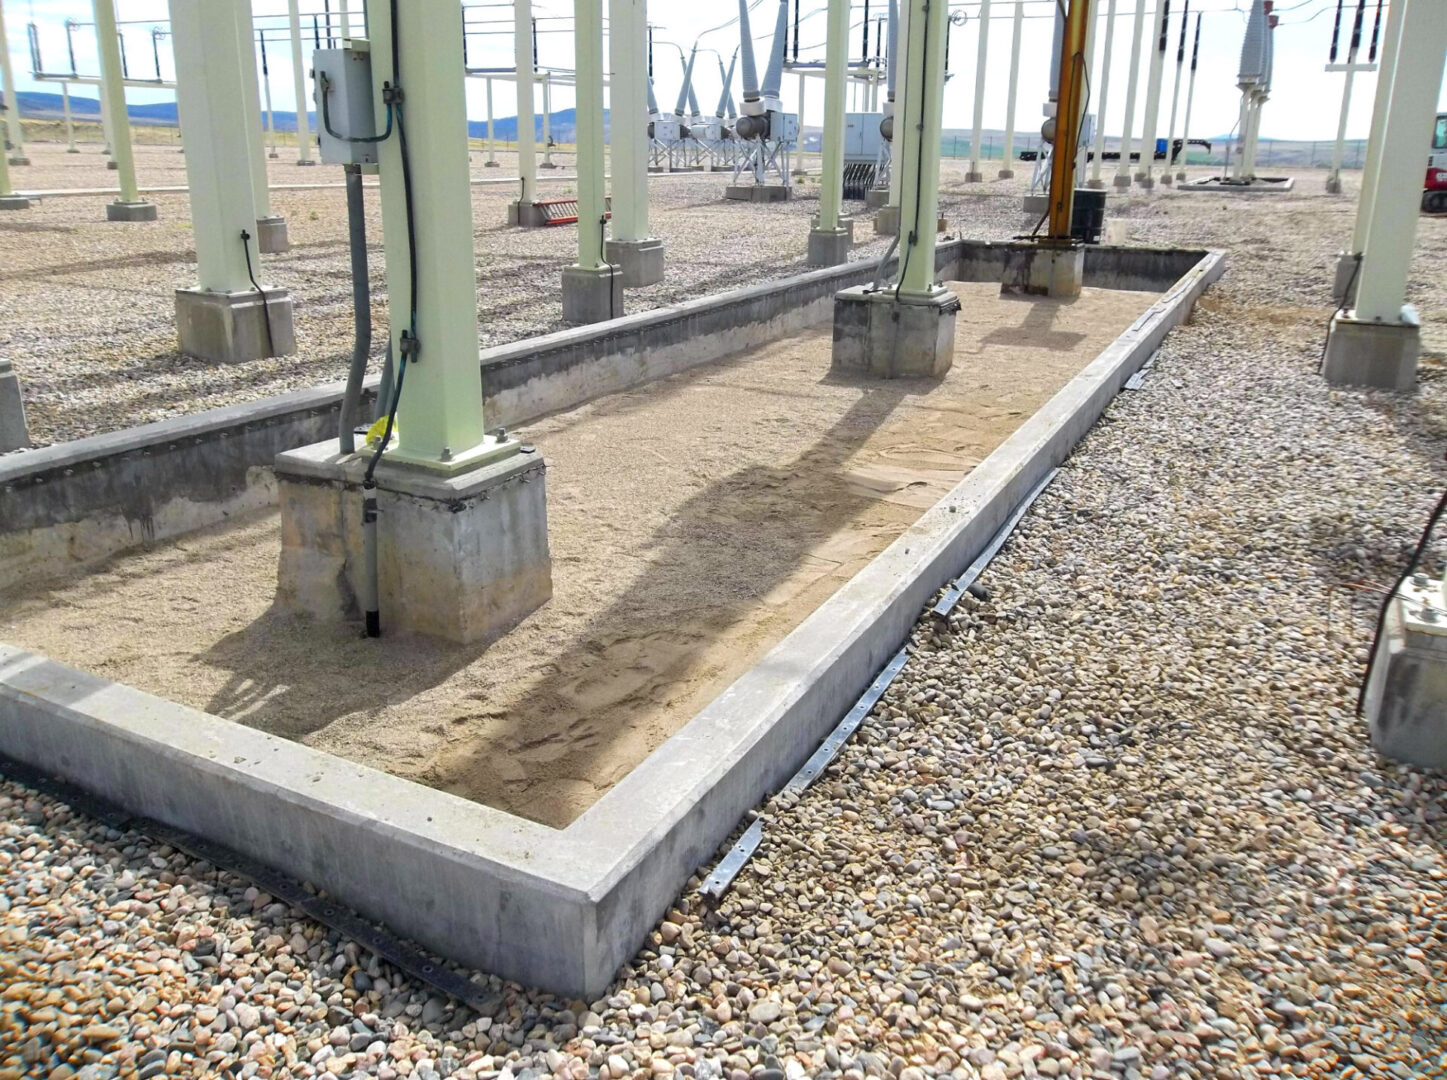 A concrete slab with cement pillars and gravel.